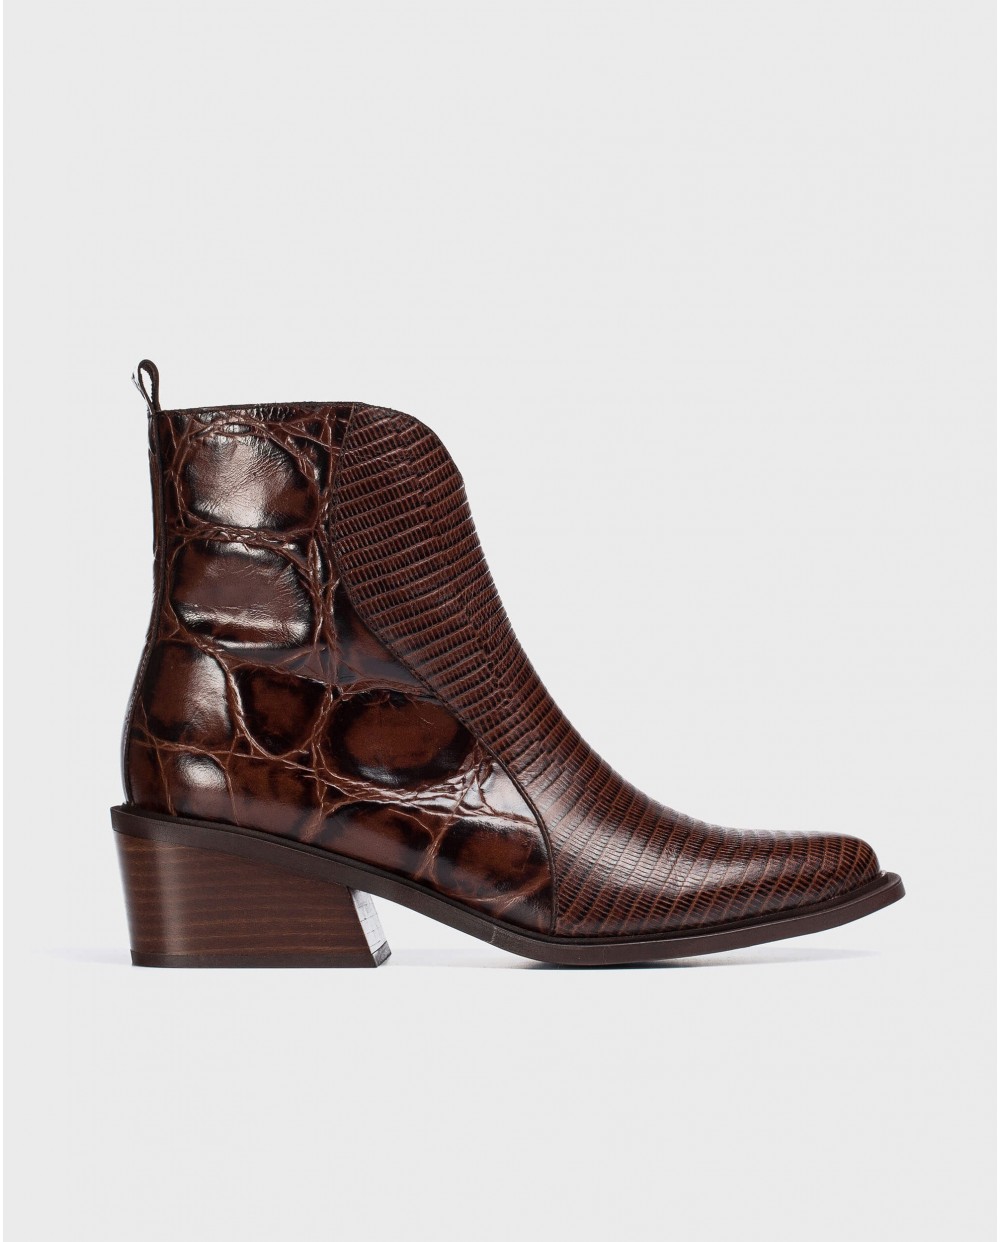 Wonders-Ankle Boots-Brown Sacramento Ankle Boot